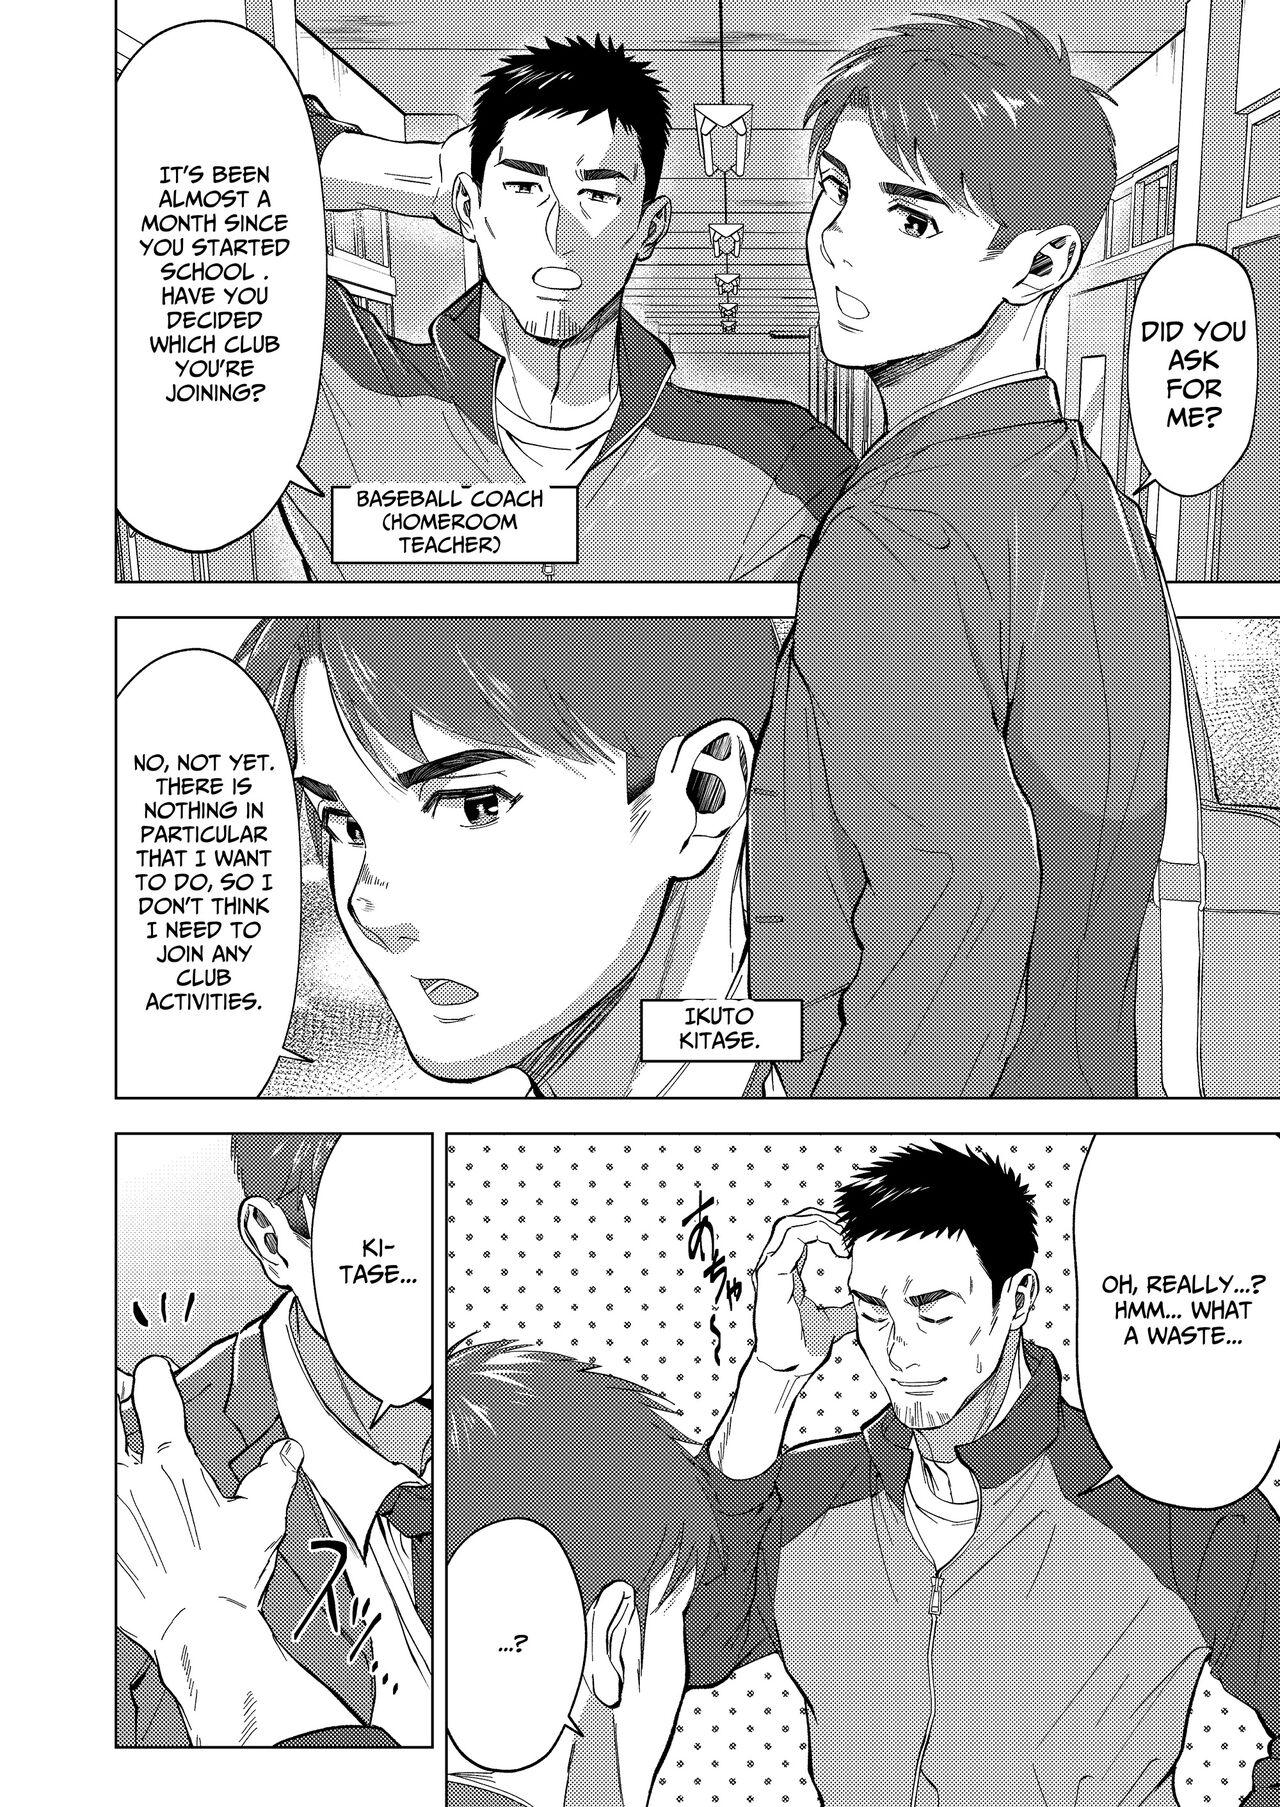 The sex manager of the boys' school baseball team!? 1